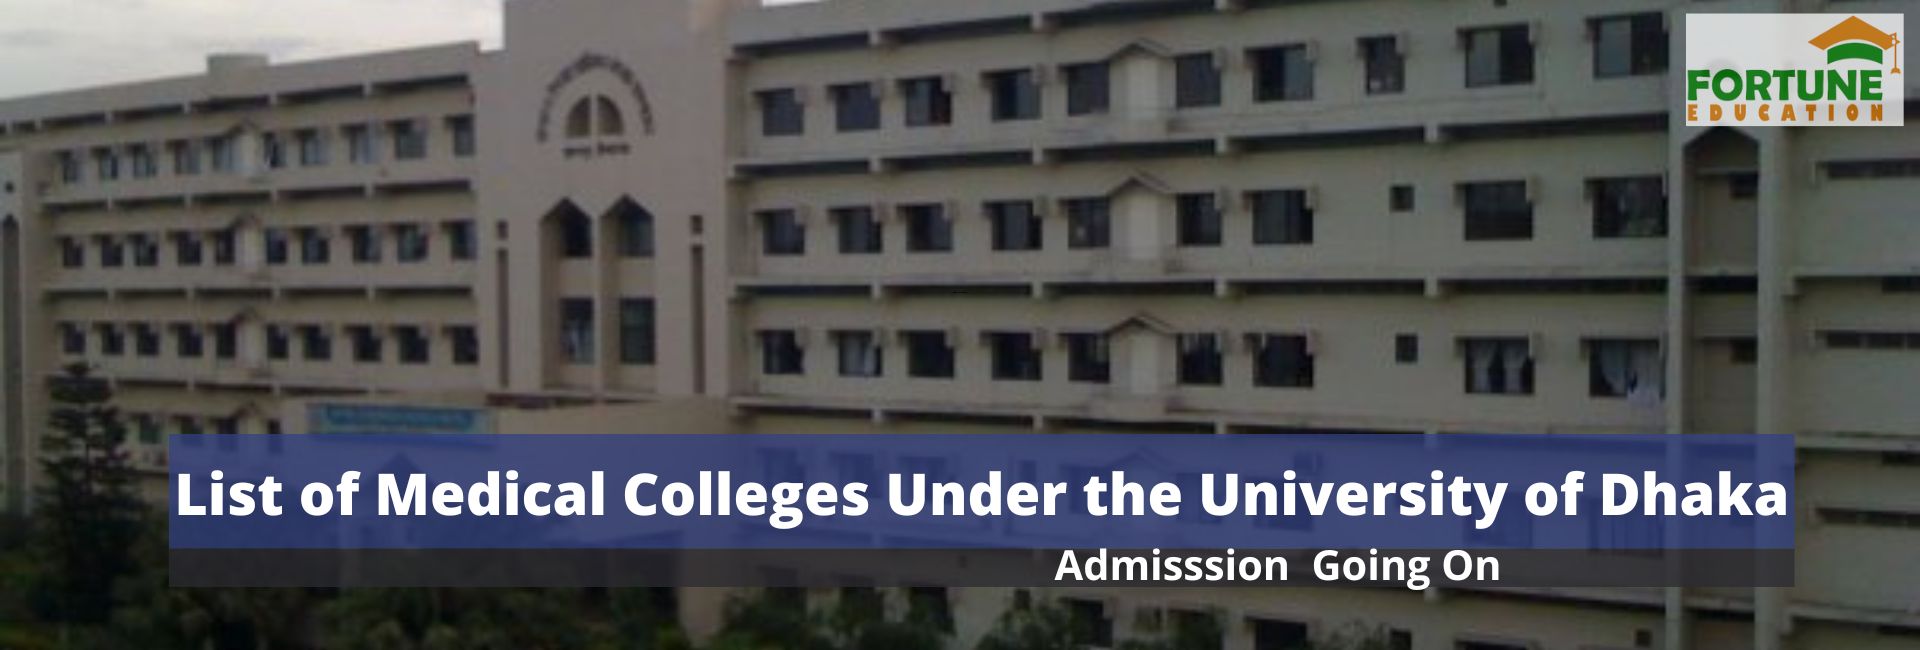 List of Medical Colleges Under the University of Dhaka